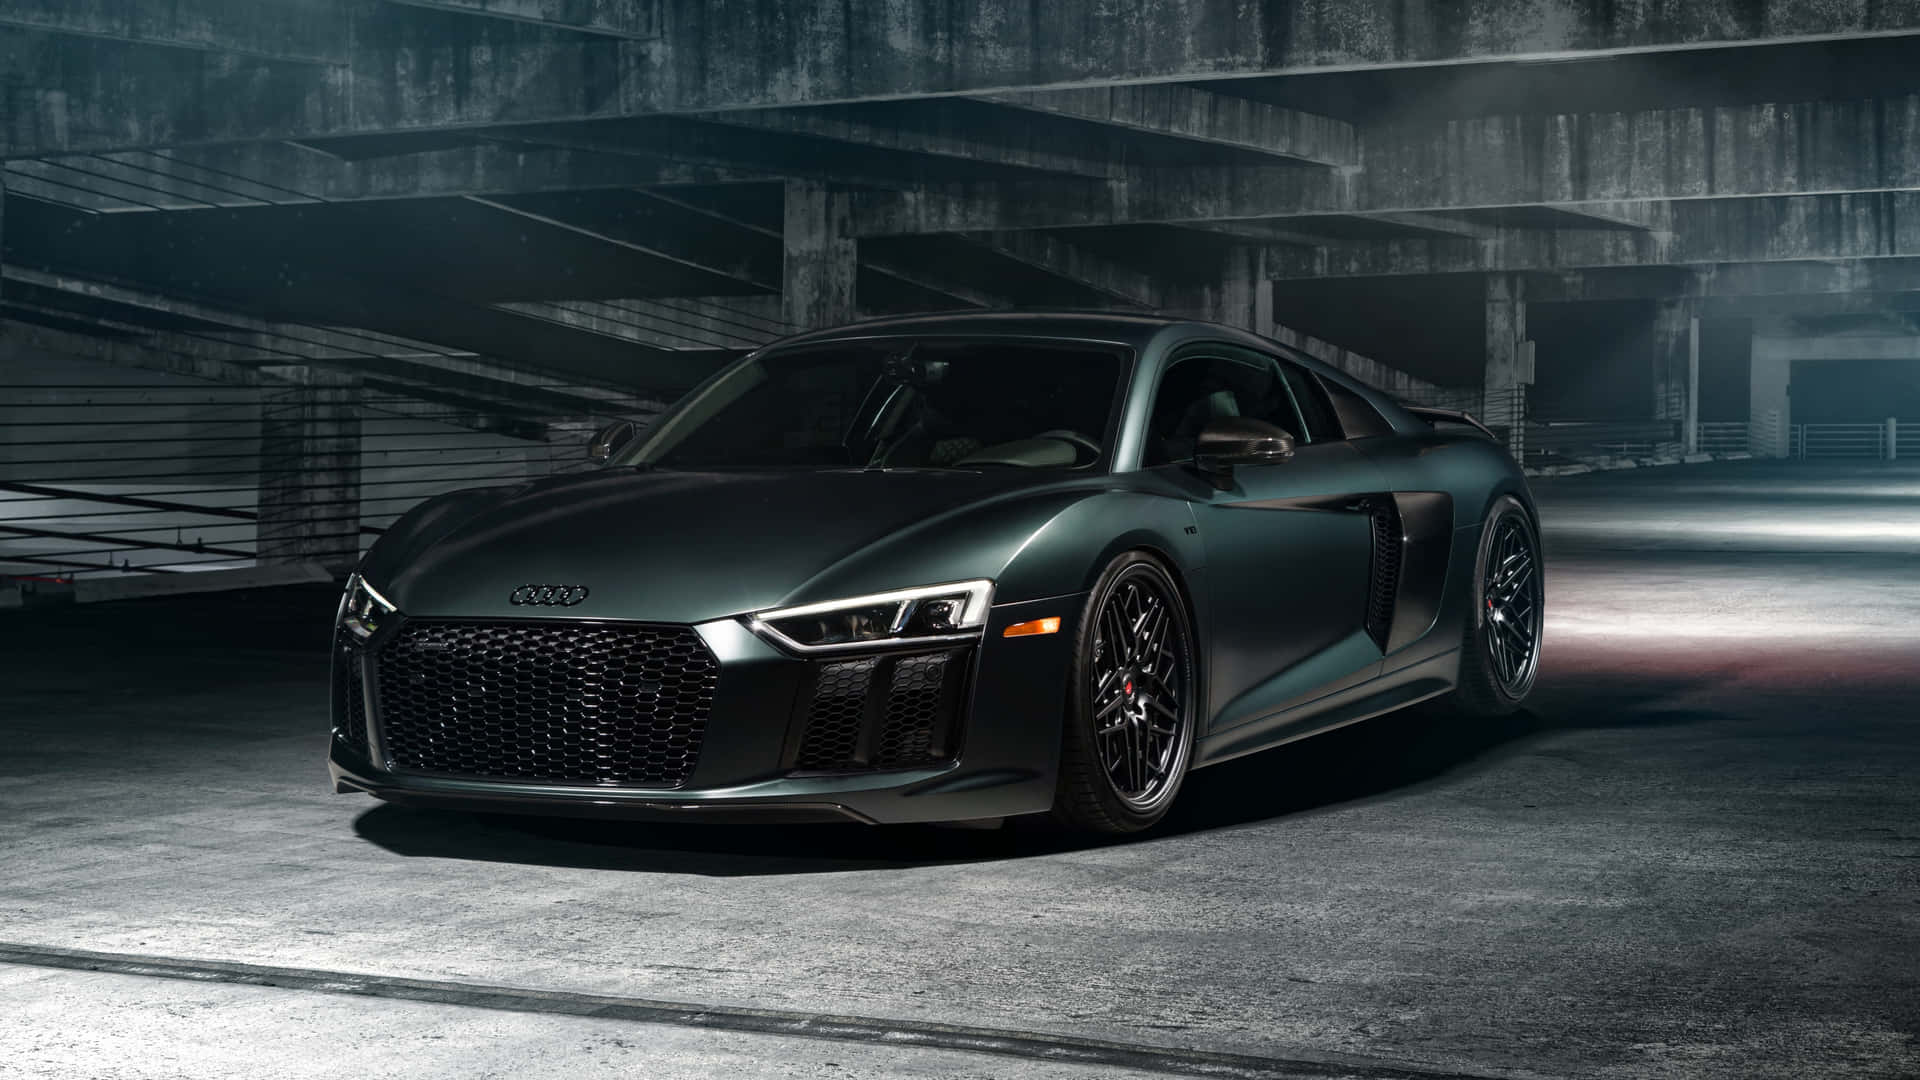 "Live life in the fast lane with the Audi R8"